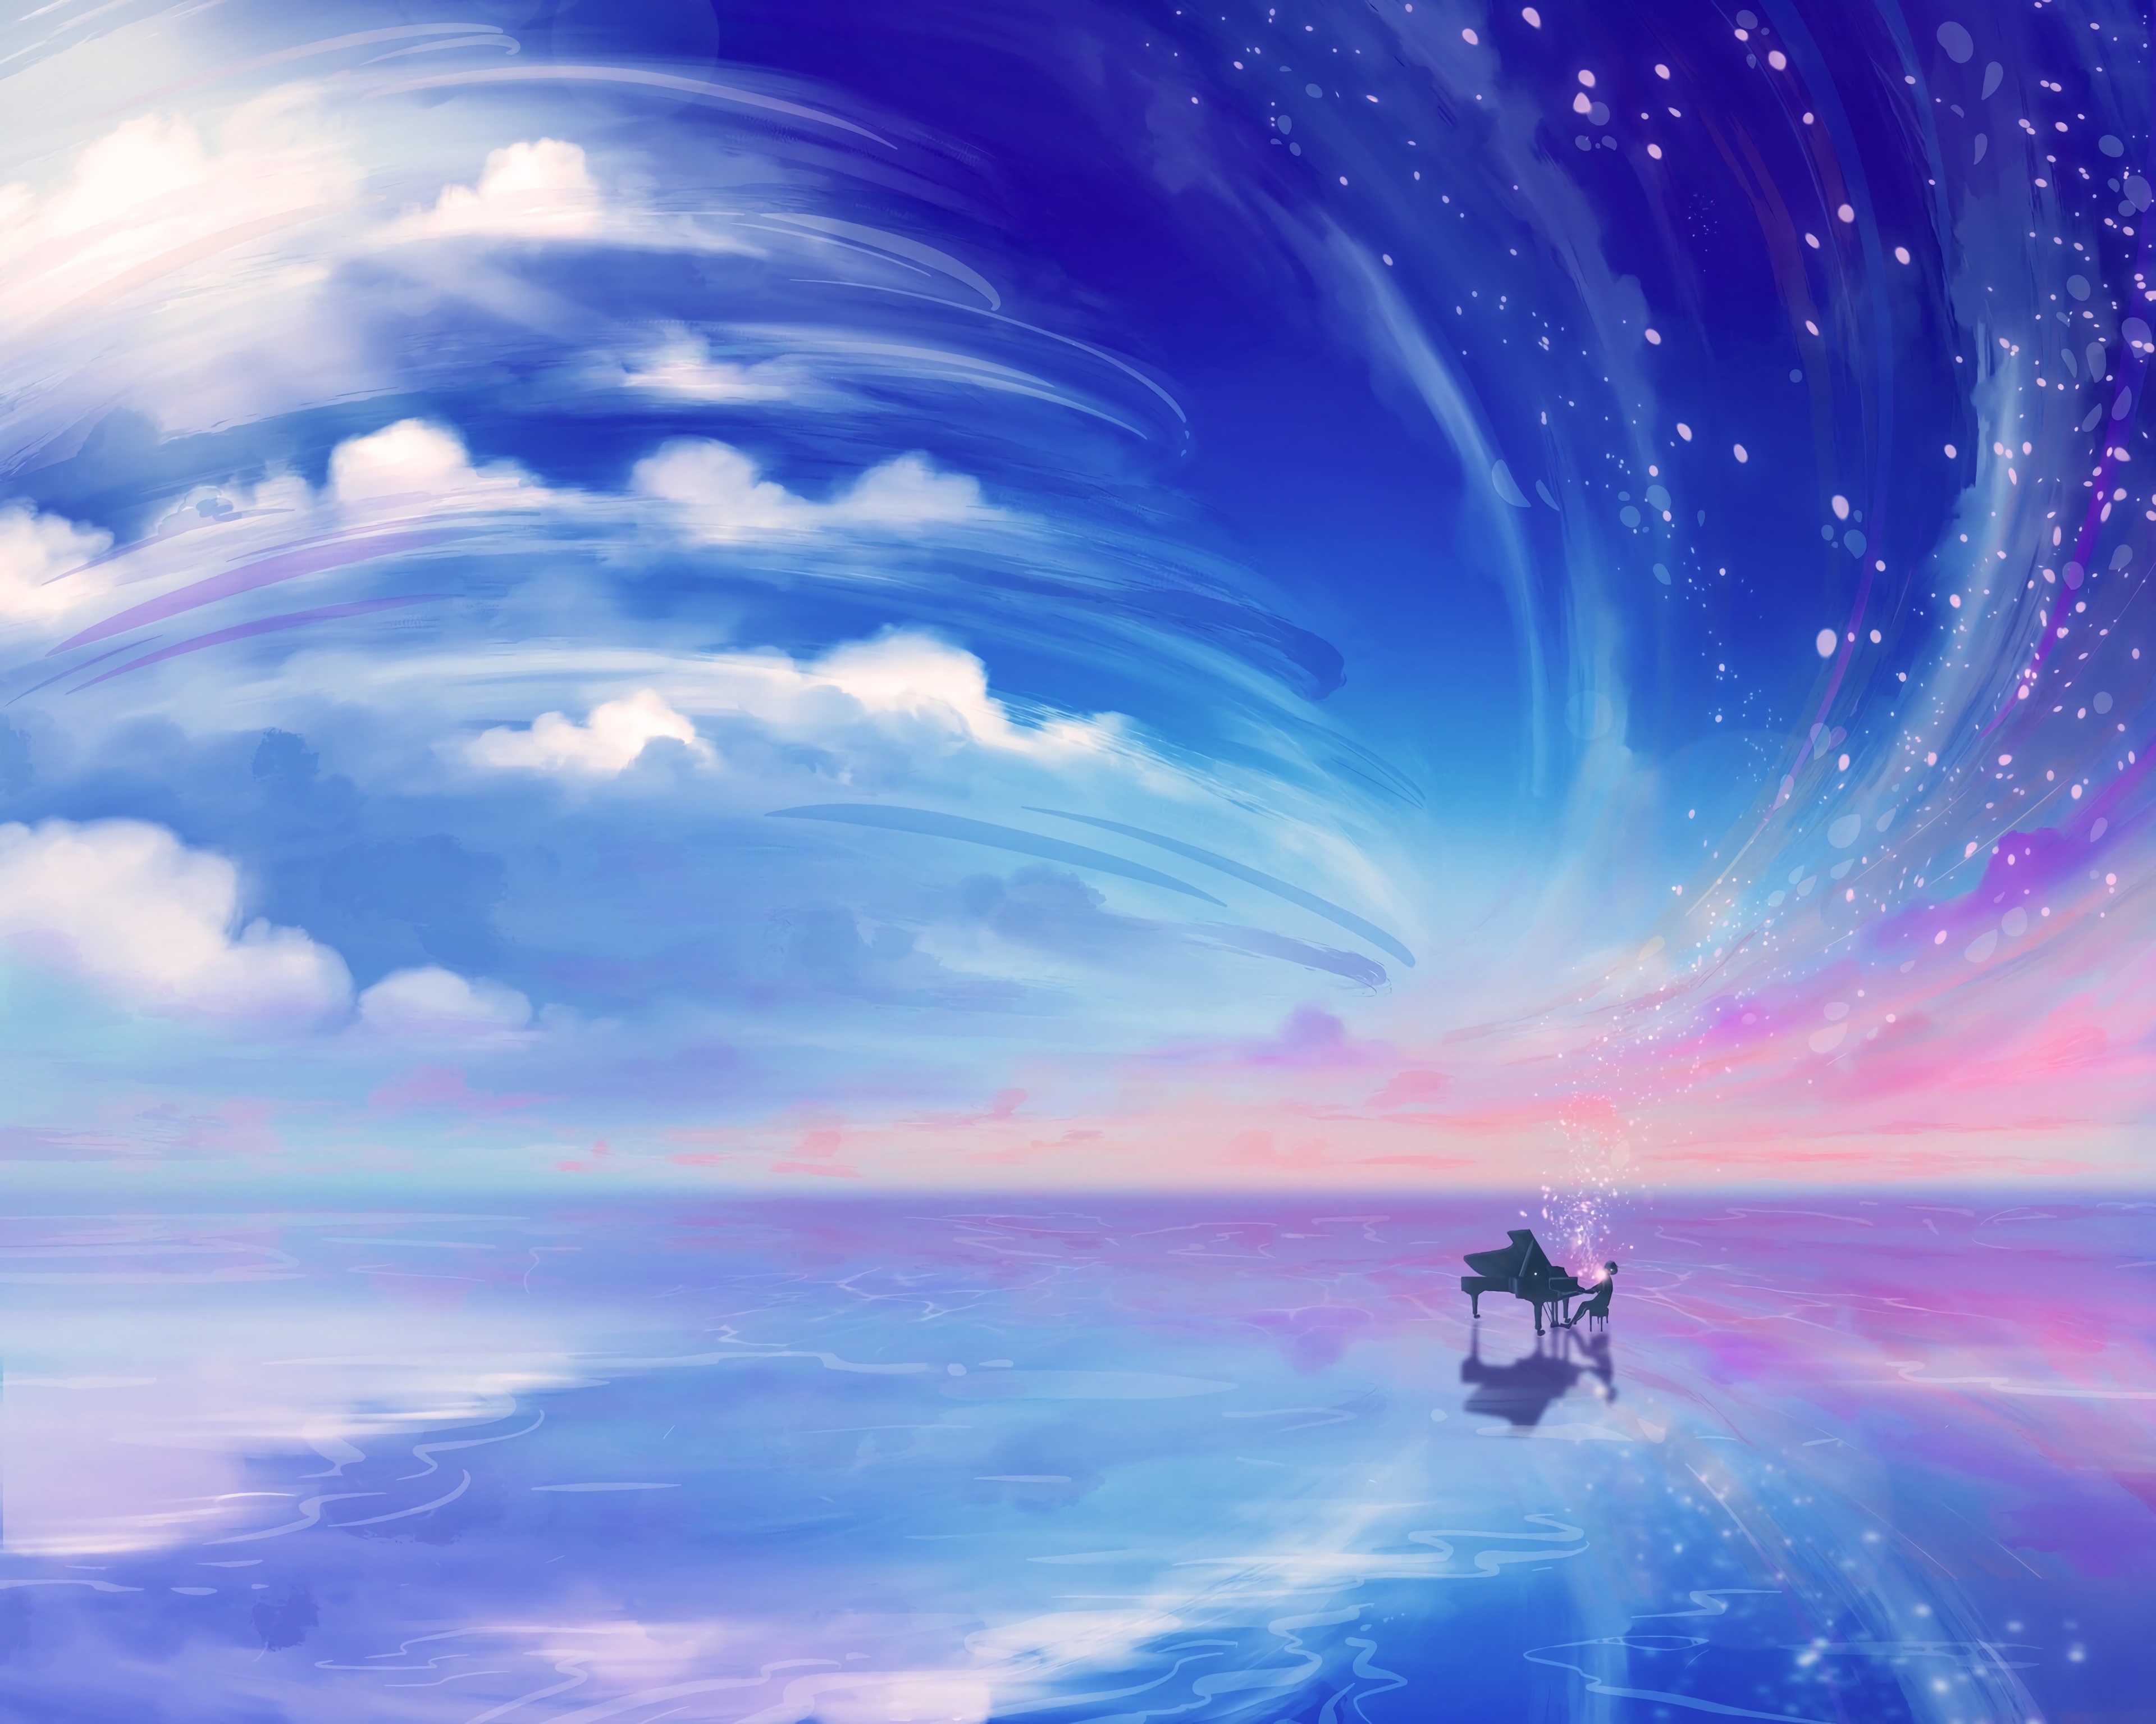 57145 download wallpaper art, clouds, piano, musician, pianist screensavers and pictures for free